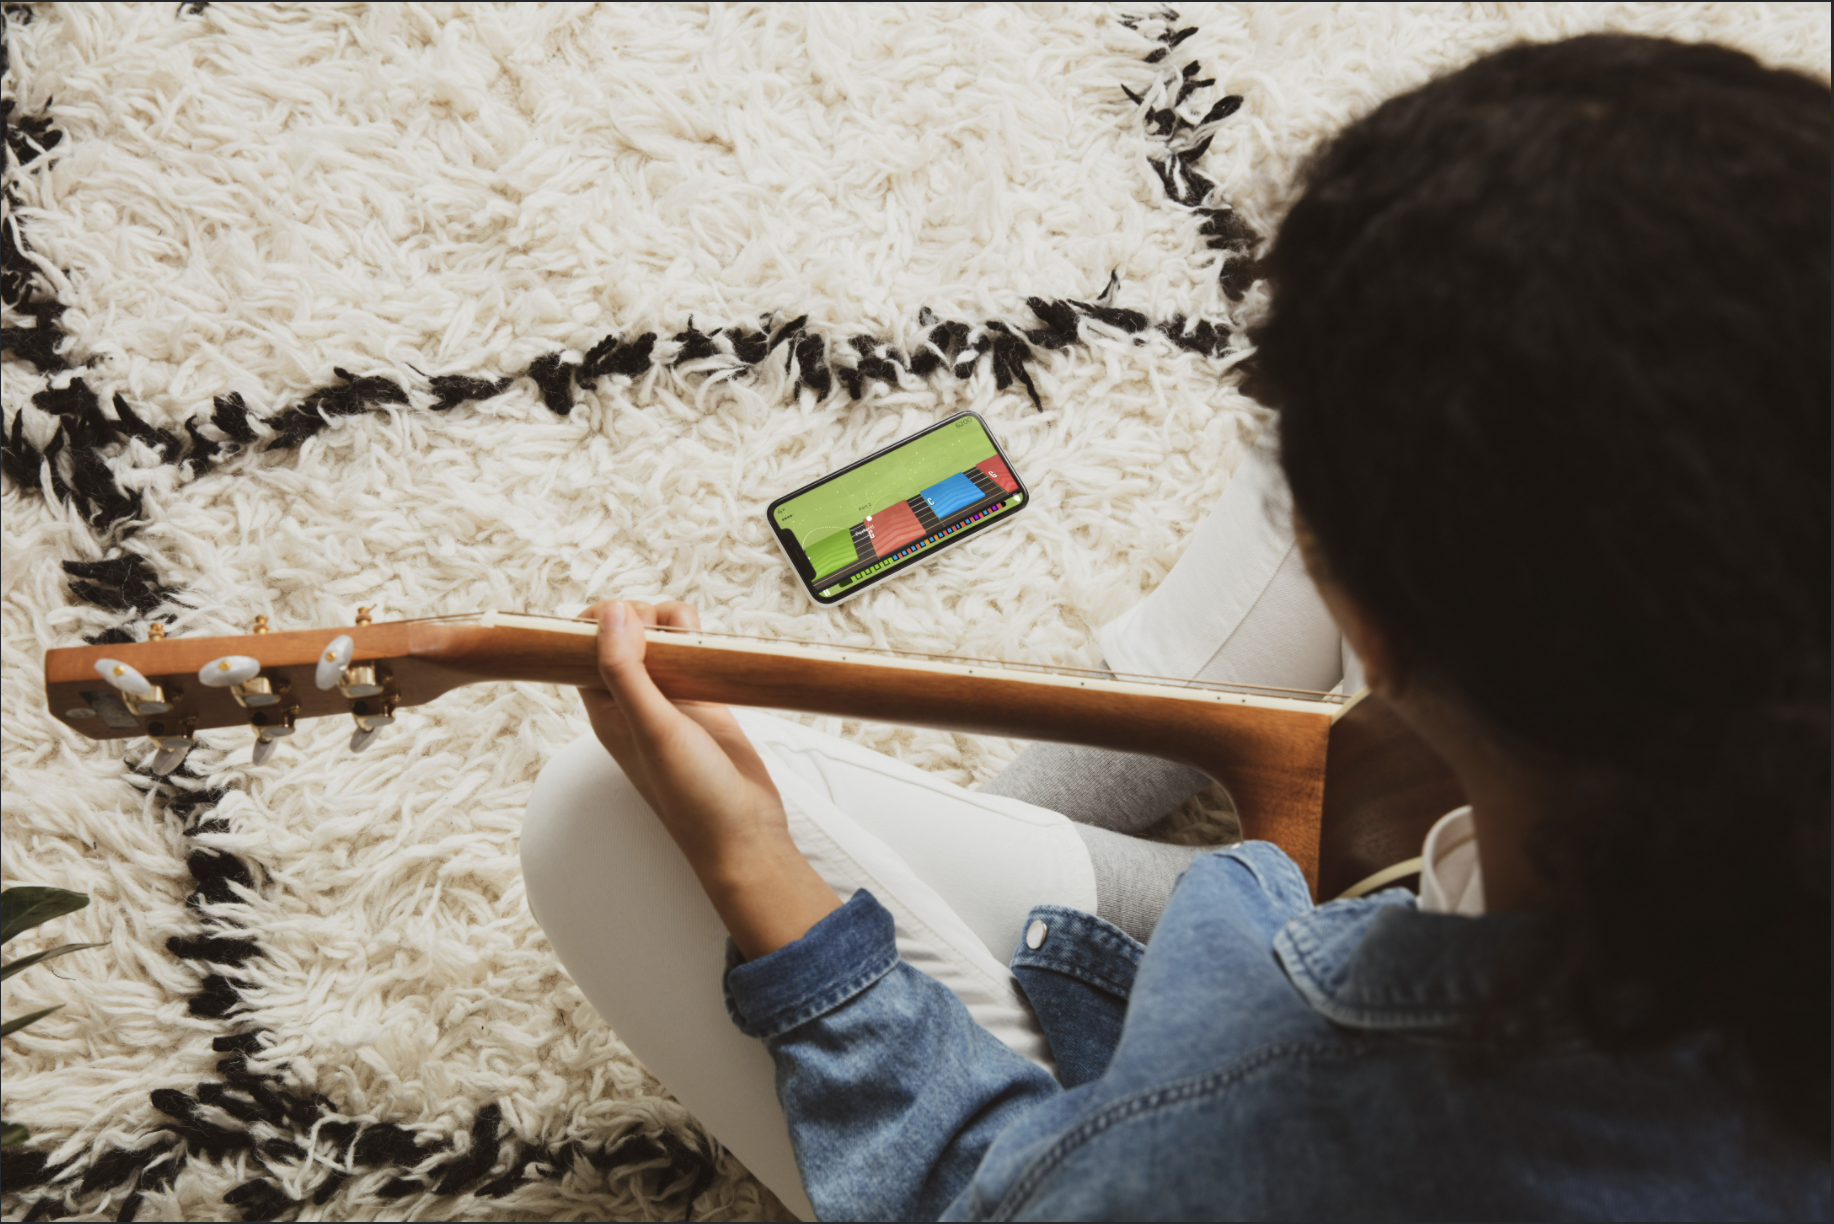 Music education app Yousician secures $28m in funding